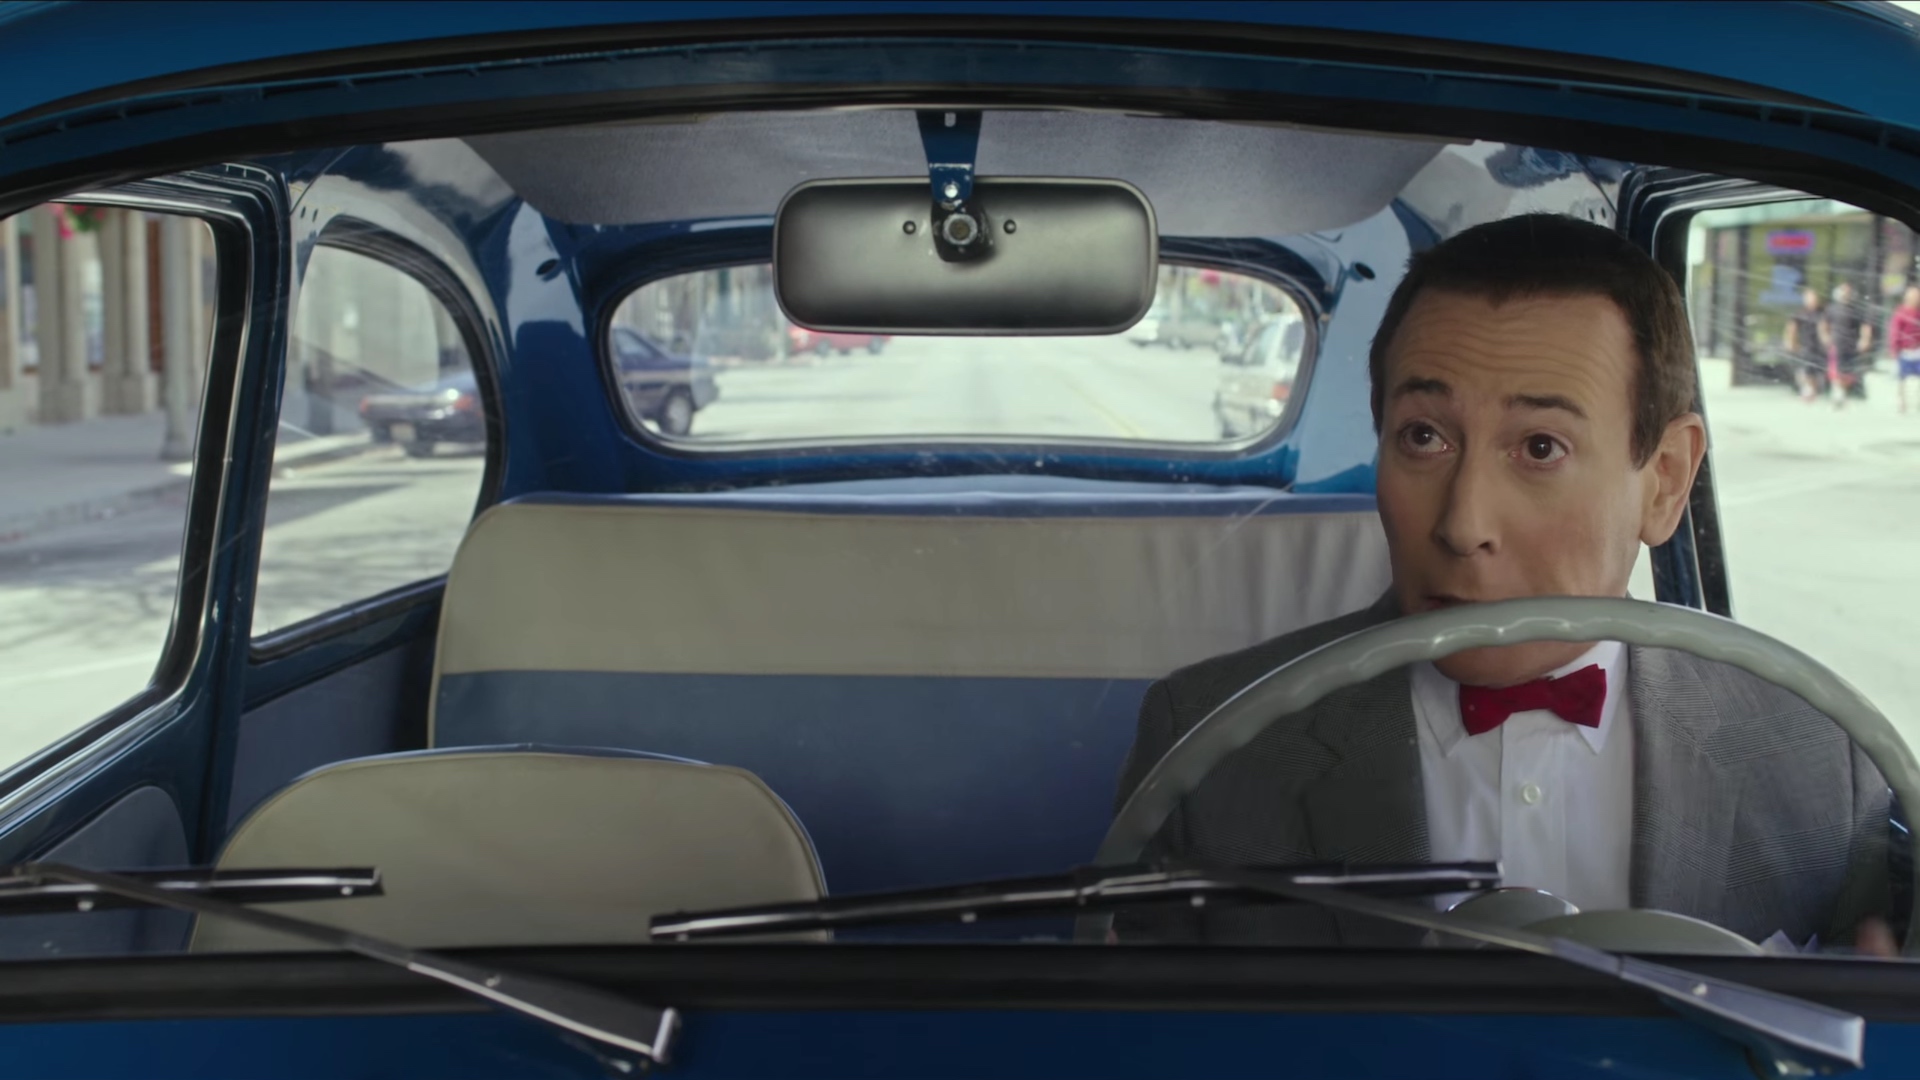 FLOOD - Open Up the Alamo Basement: “Pee-wee’s Big Holiday” is Out March 18